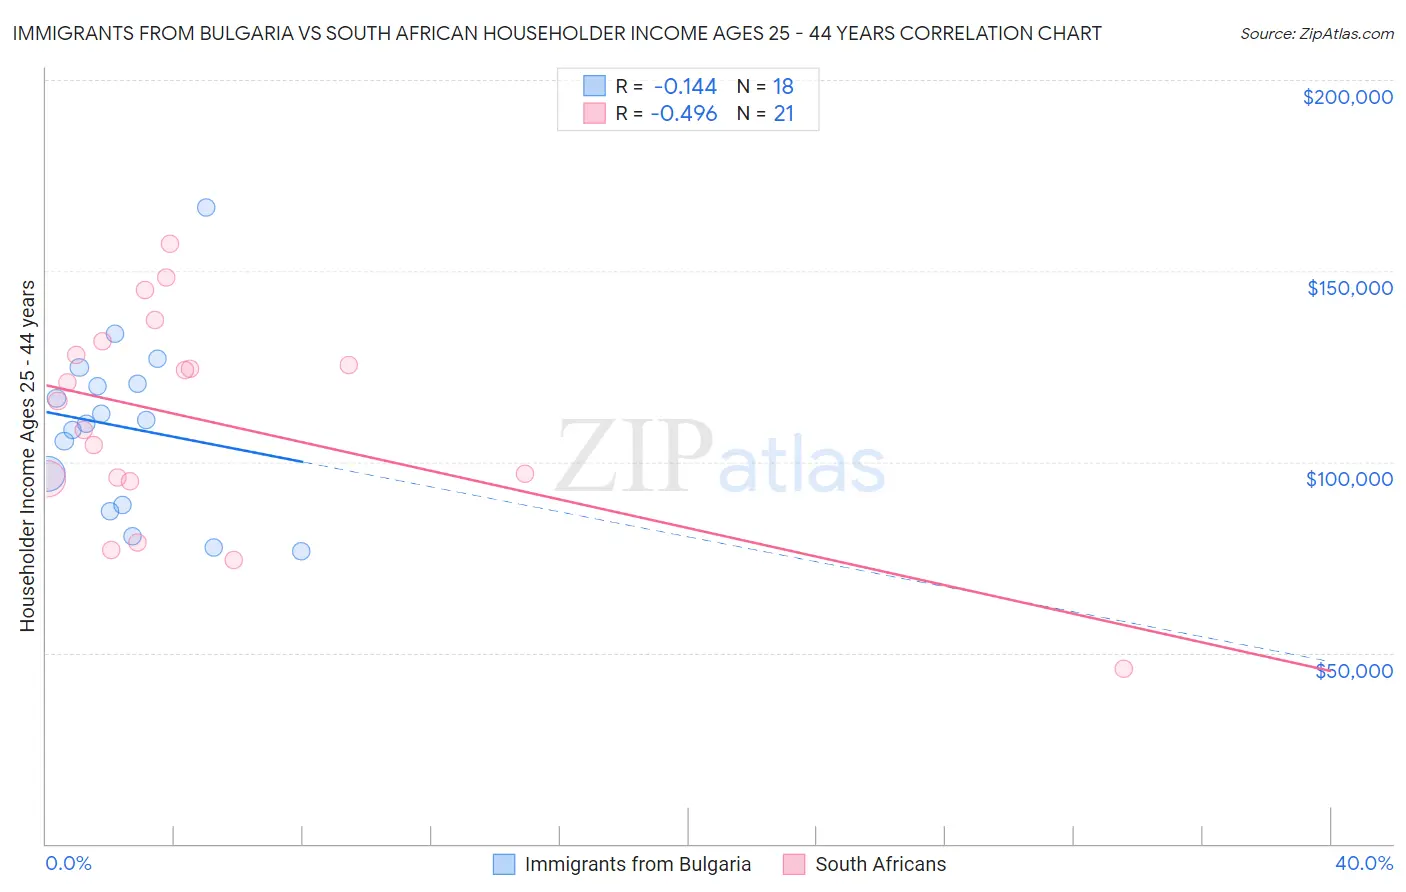 Immigrants from Bulgaria vs South African Householder Income Ages 25 - 44 years